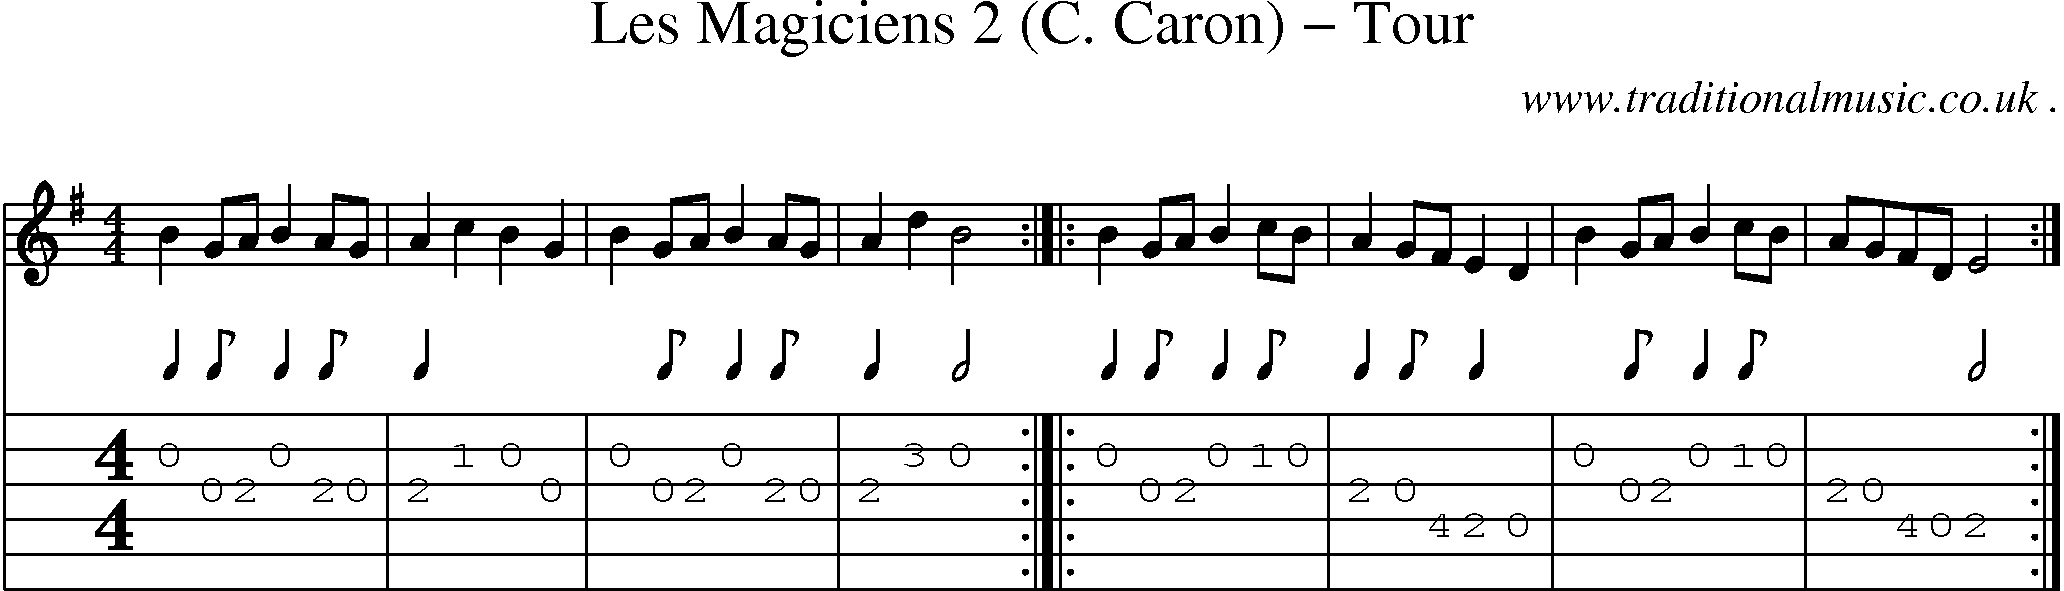 Sheet-Music and Guitar Tabs for Les Magiciens 2 (c Caron) Tour